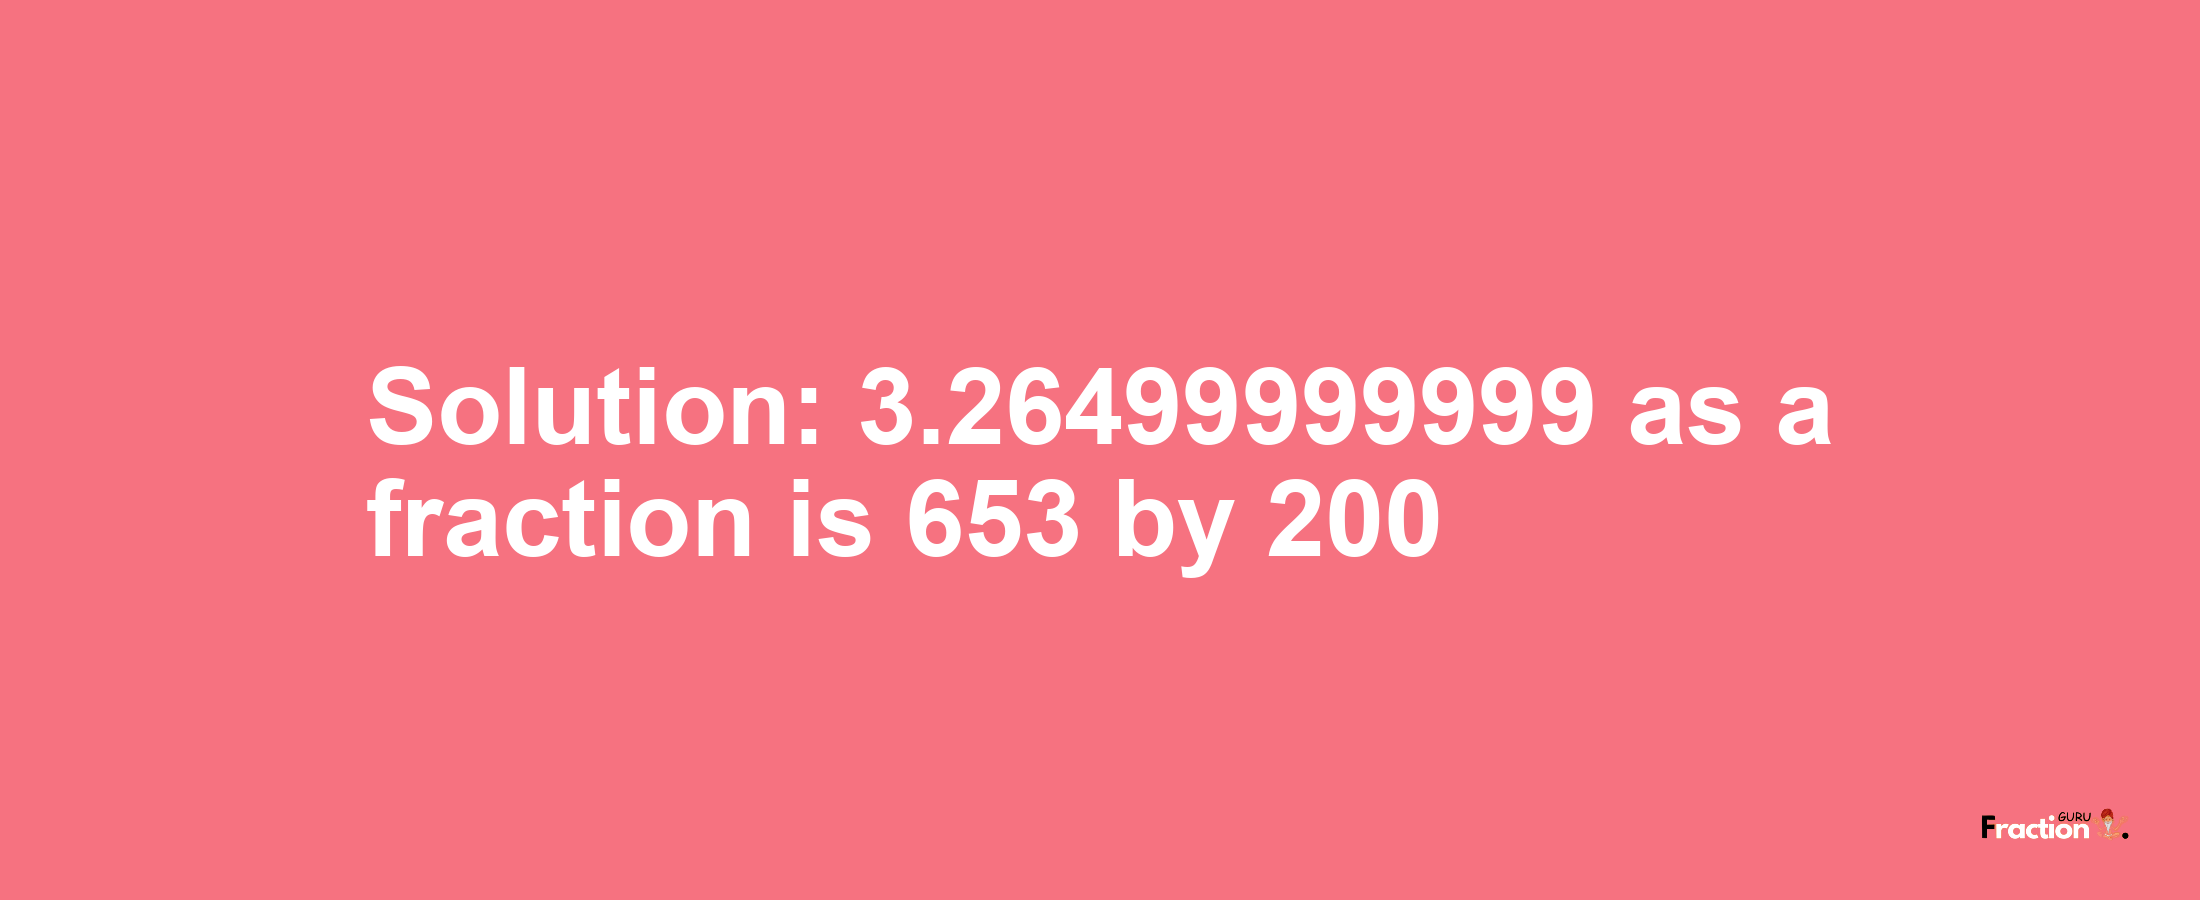 Solution:3.26499999999 as a fraction is 653/200